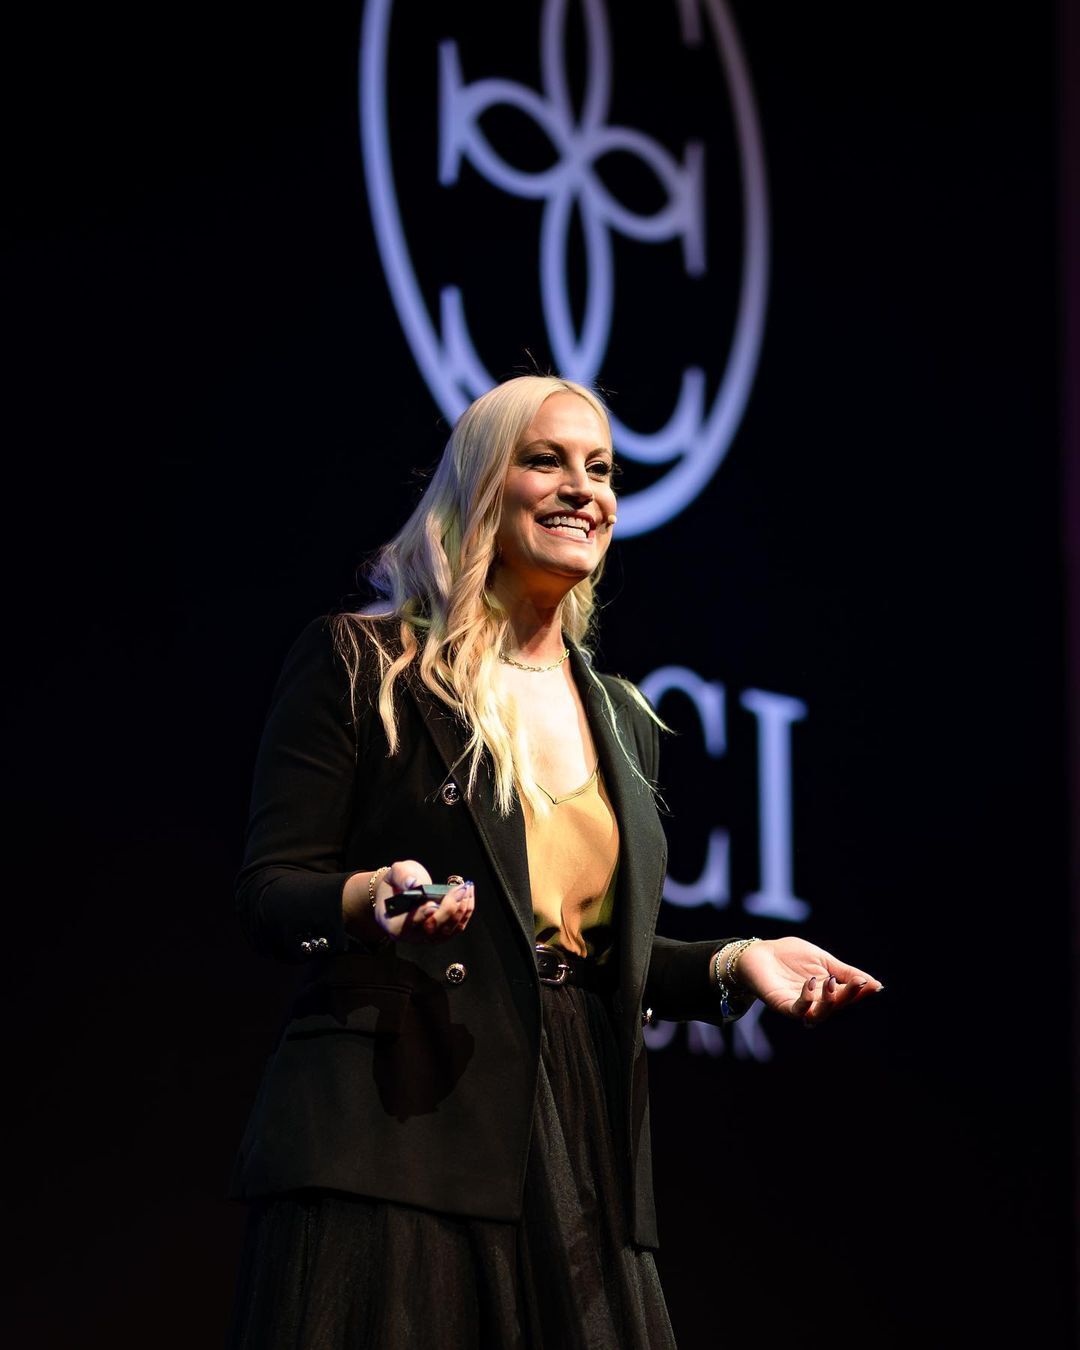 Ceci speaking at RSVP Istanbul